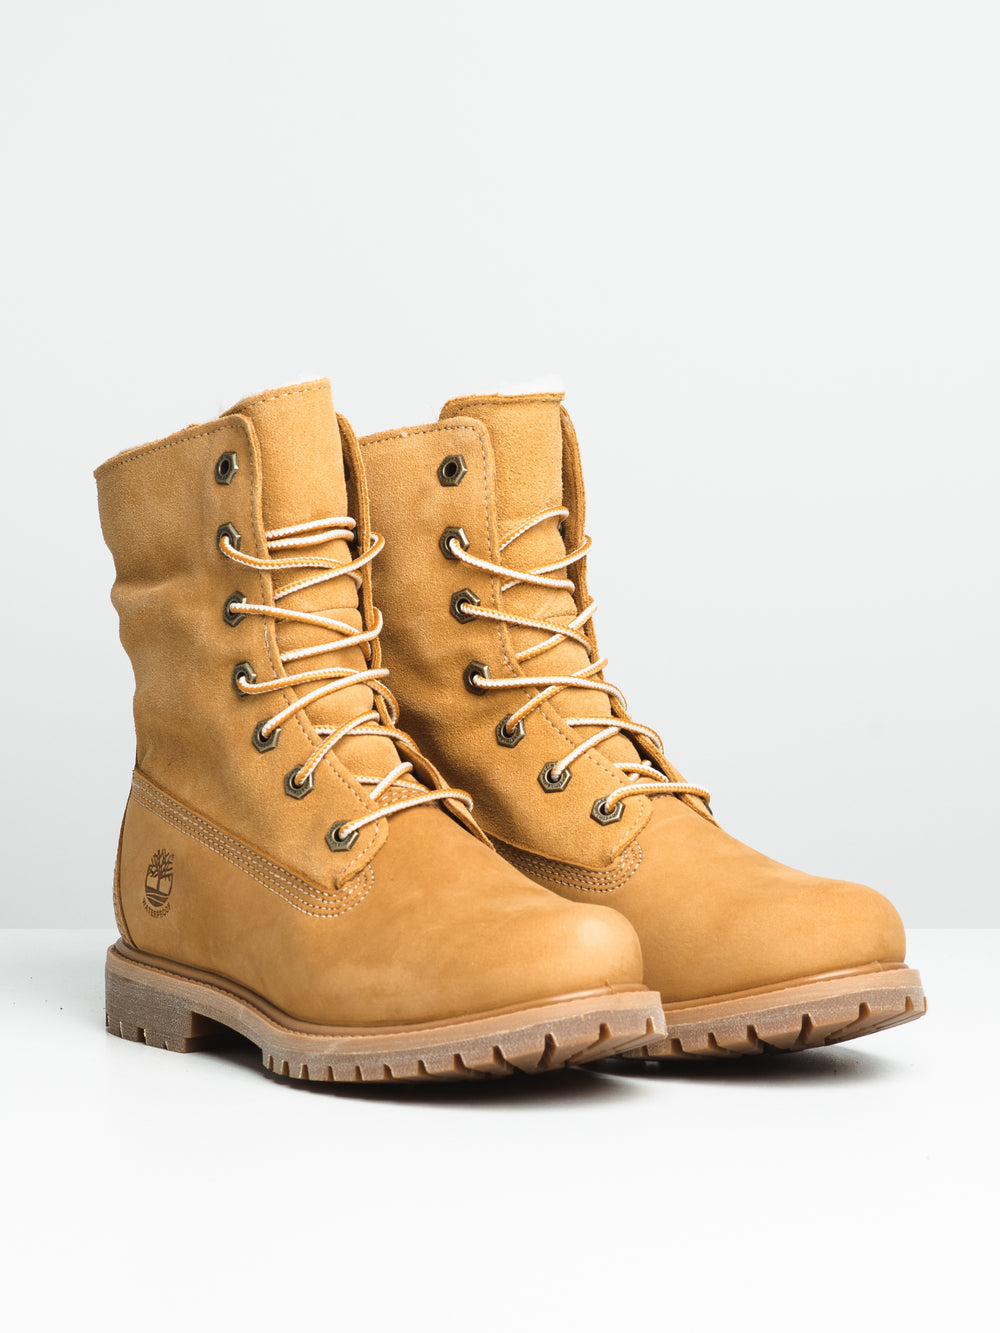 WOMENS TIMBERLAND AUTHENTIC TEDDY FOLD WATERPROOF BOOTS